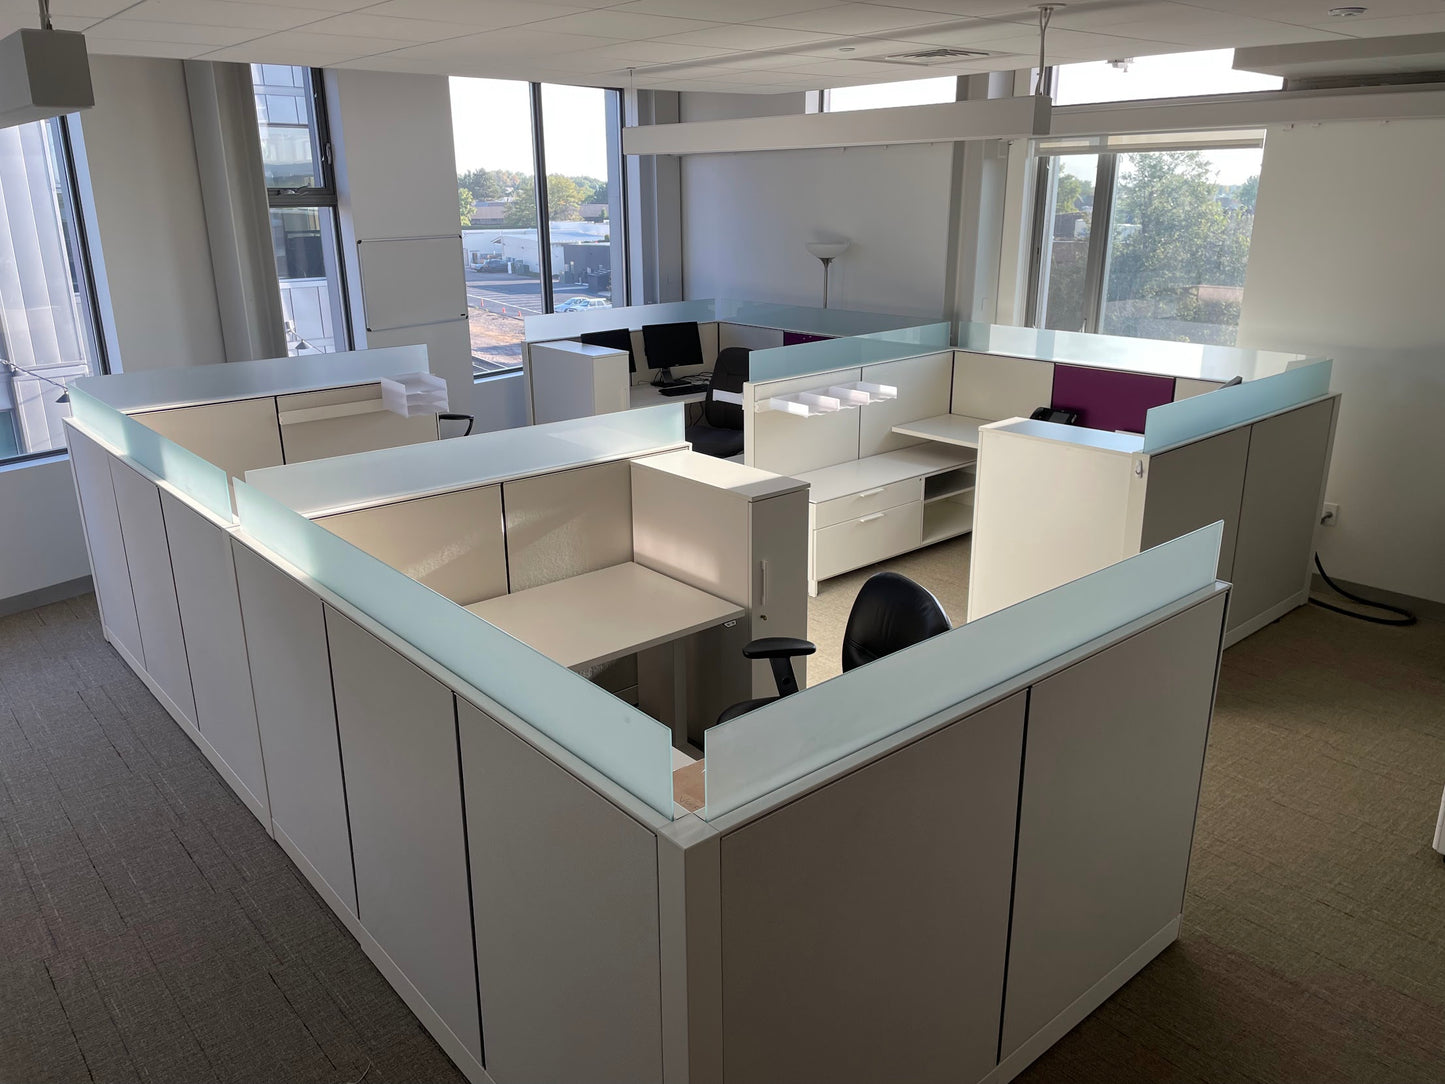 Picture of Herman miller canvas cubicle system with white and purple panels